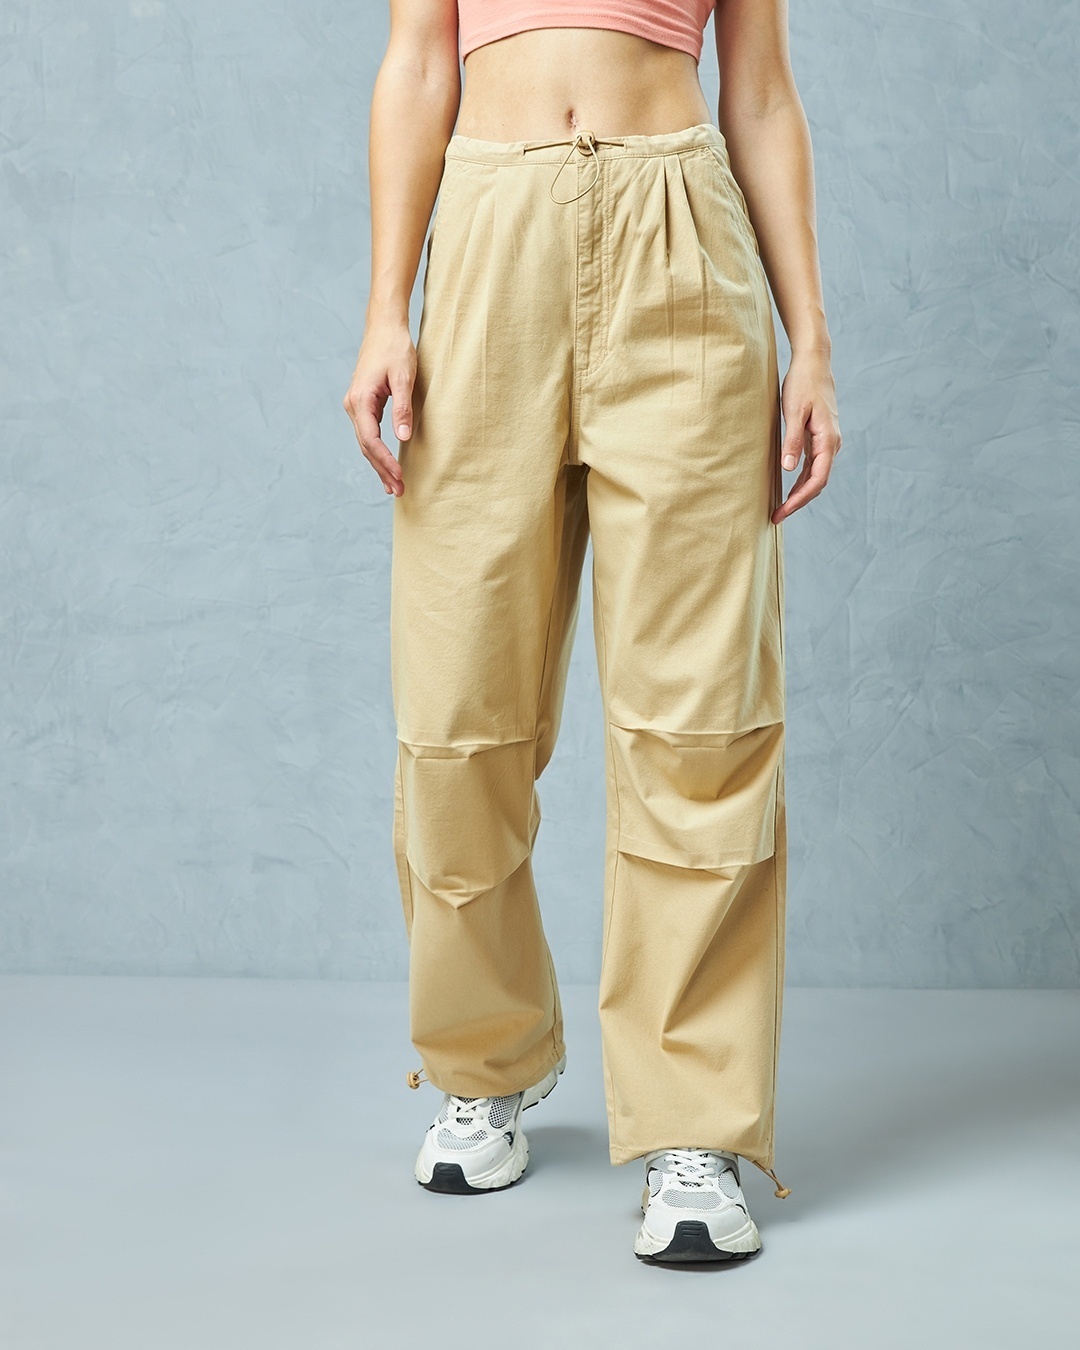 Buy Vasavi Women Beige Slim fit Cigarette pants Online at Low Prices in  India - Paytmmall.com